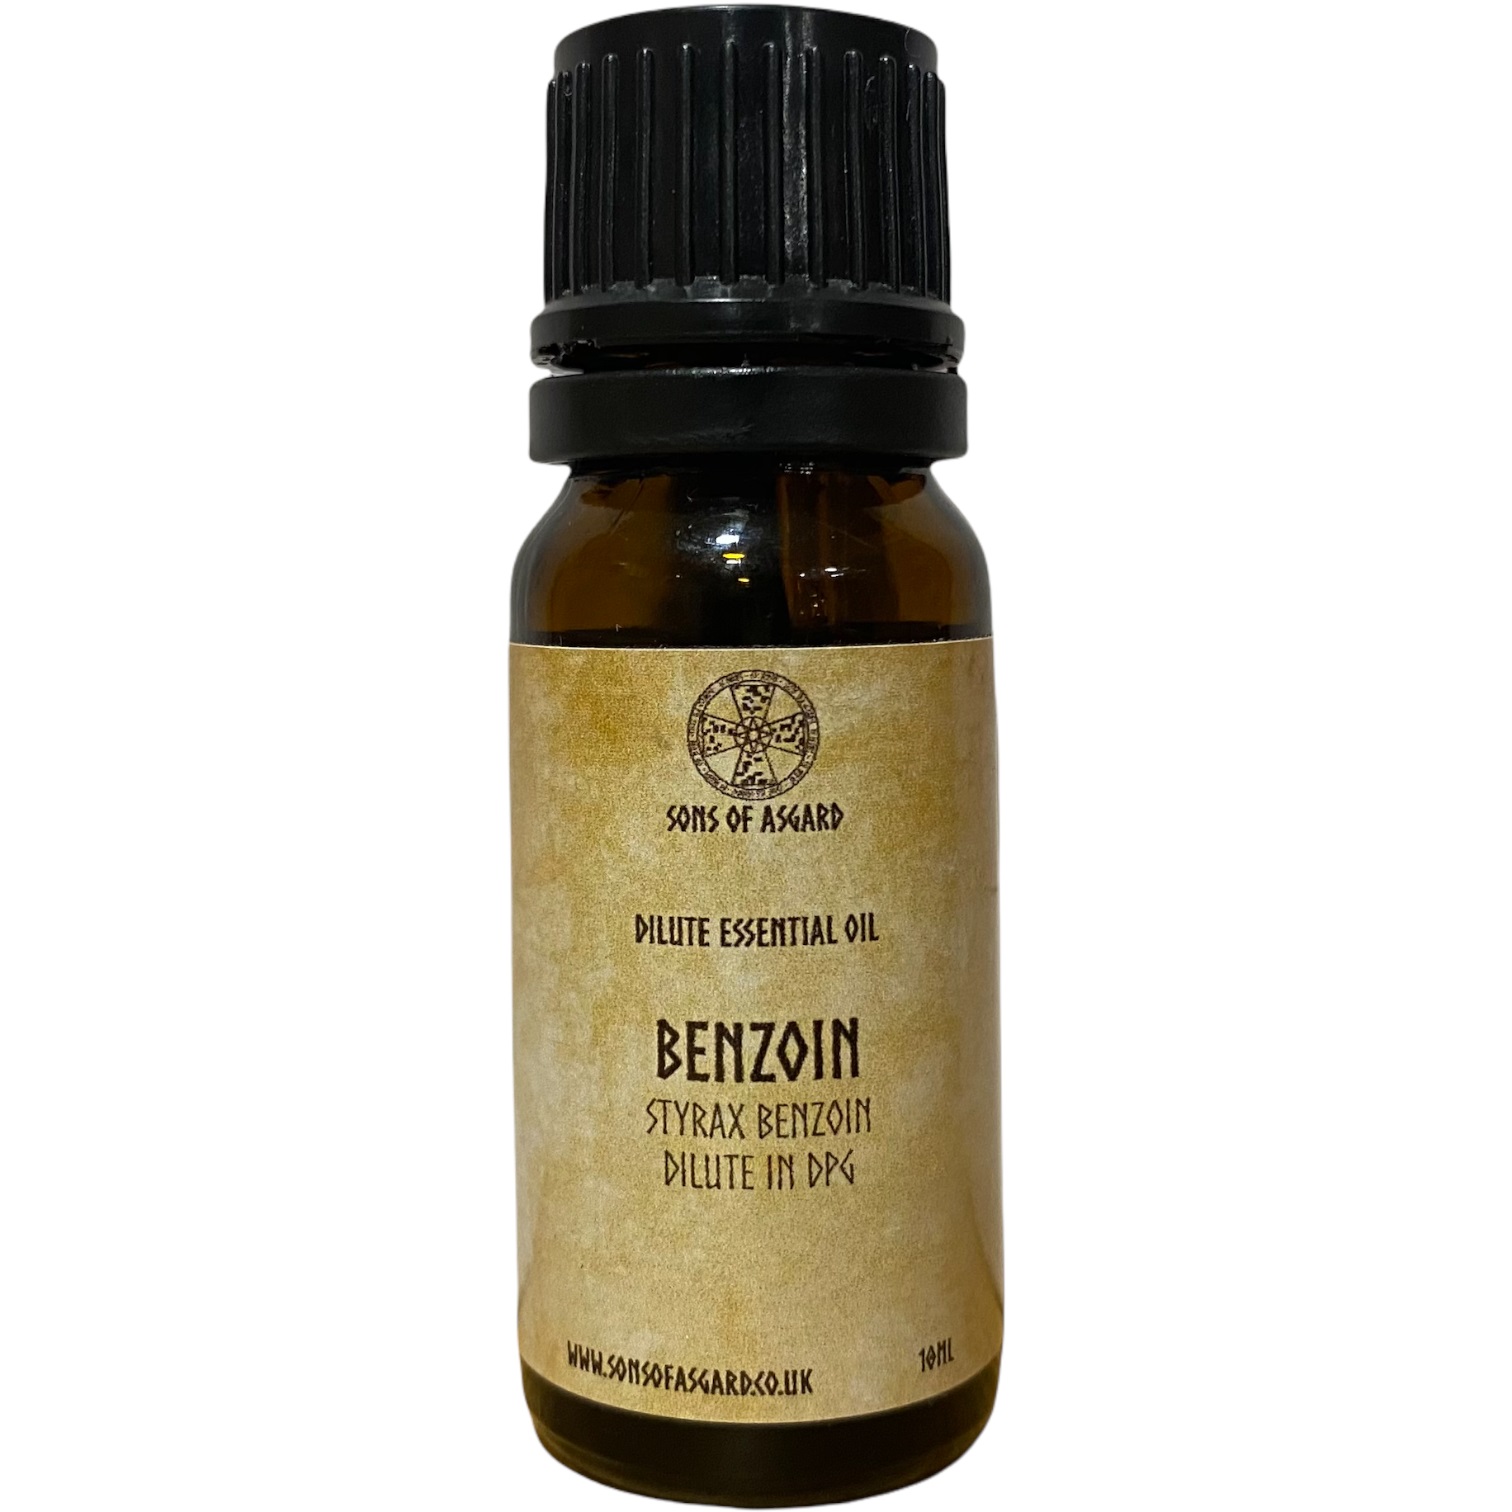 Benzoin - Dilute Essential Oil